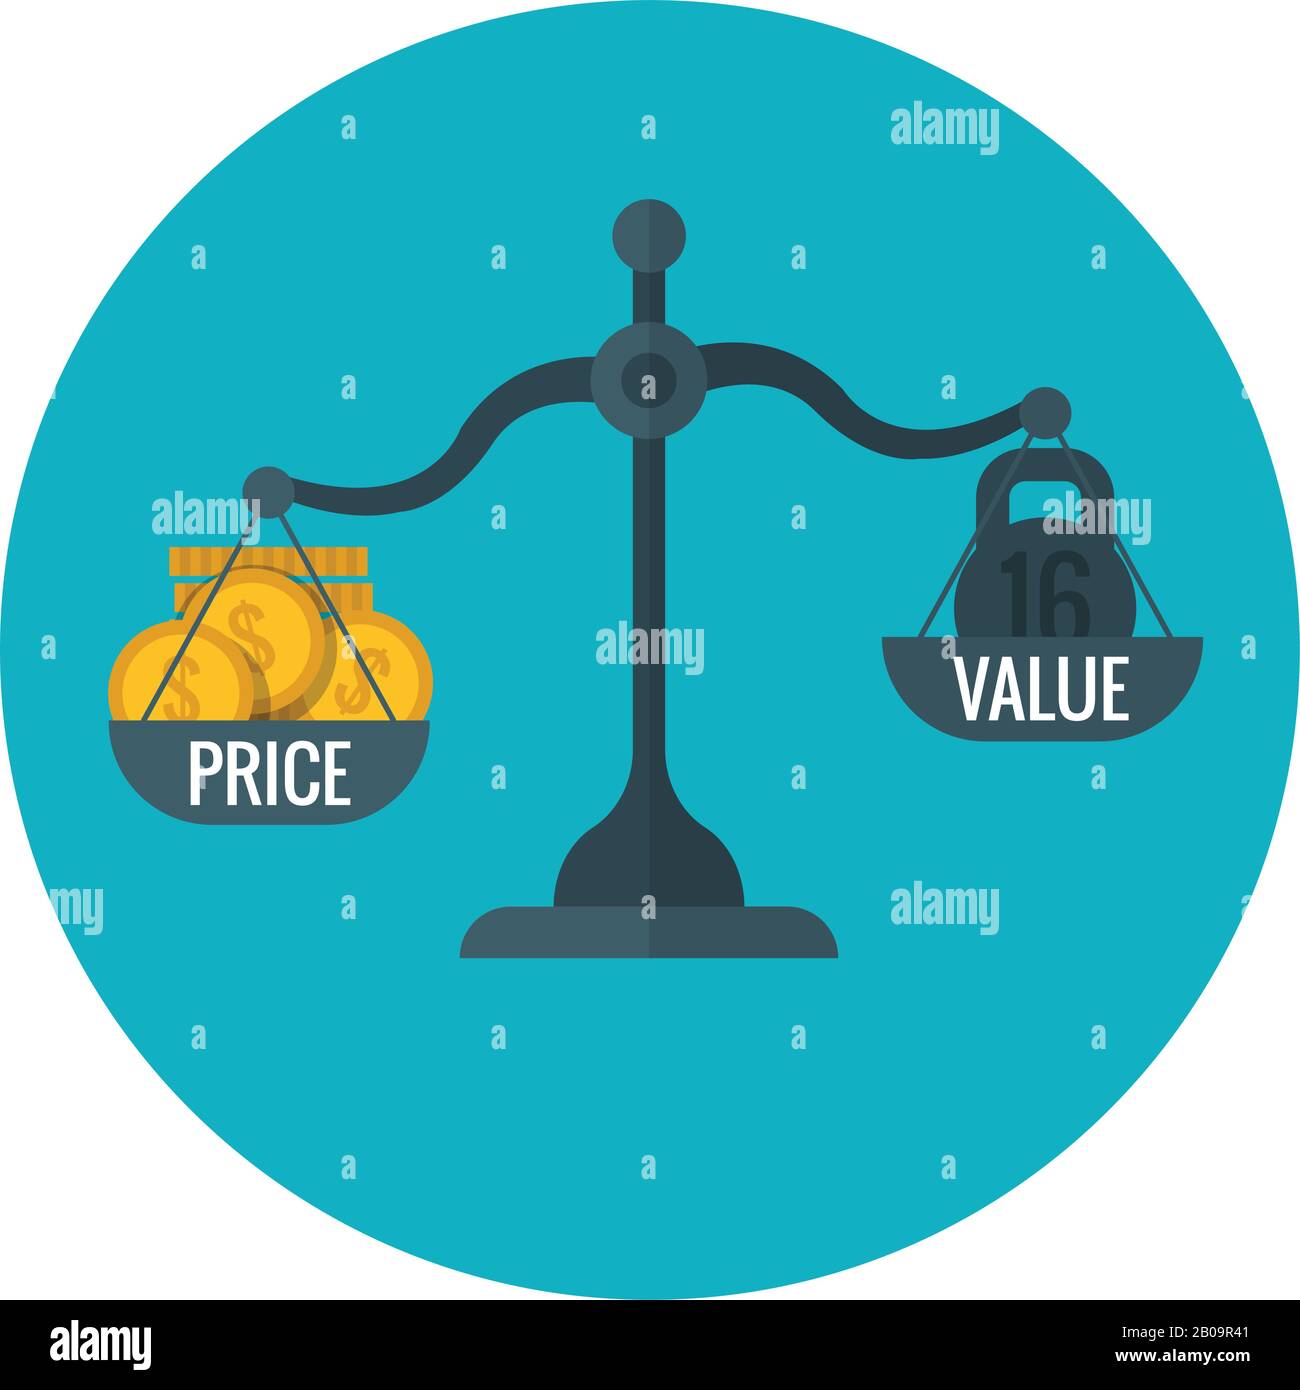 Business measurement of price and value with scale, pricing for profit vector concept. Compare price and value on scale, illustration of finance scale measurement Stock Vector